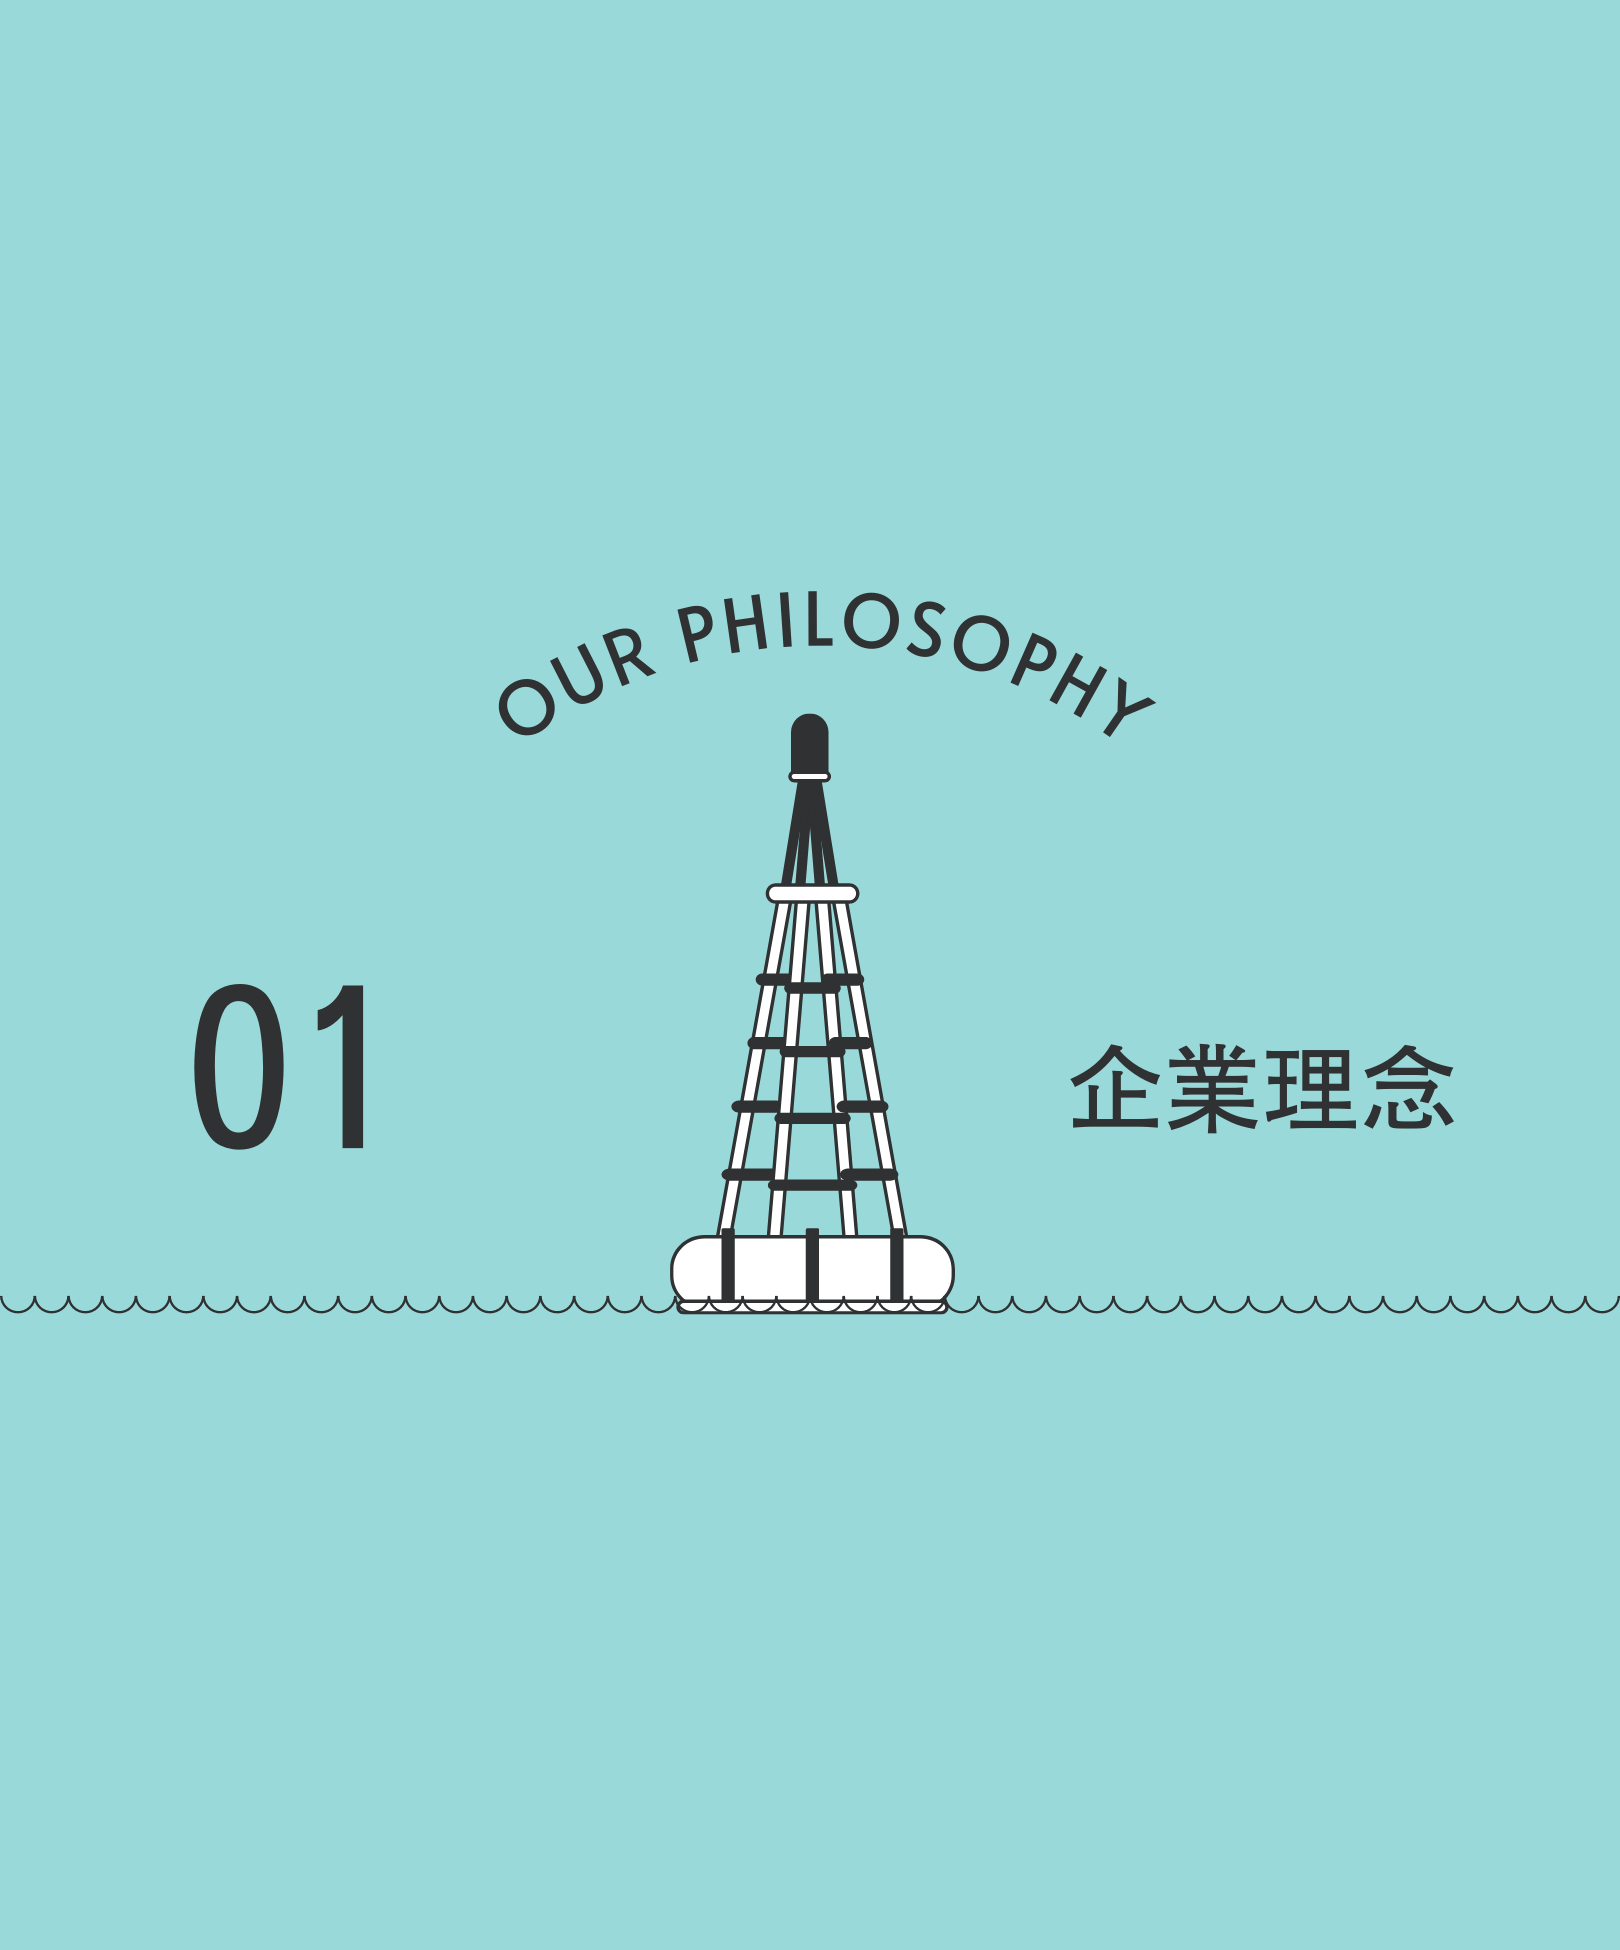 01 Our Philosophy 企業理念